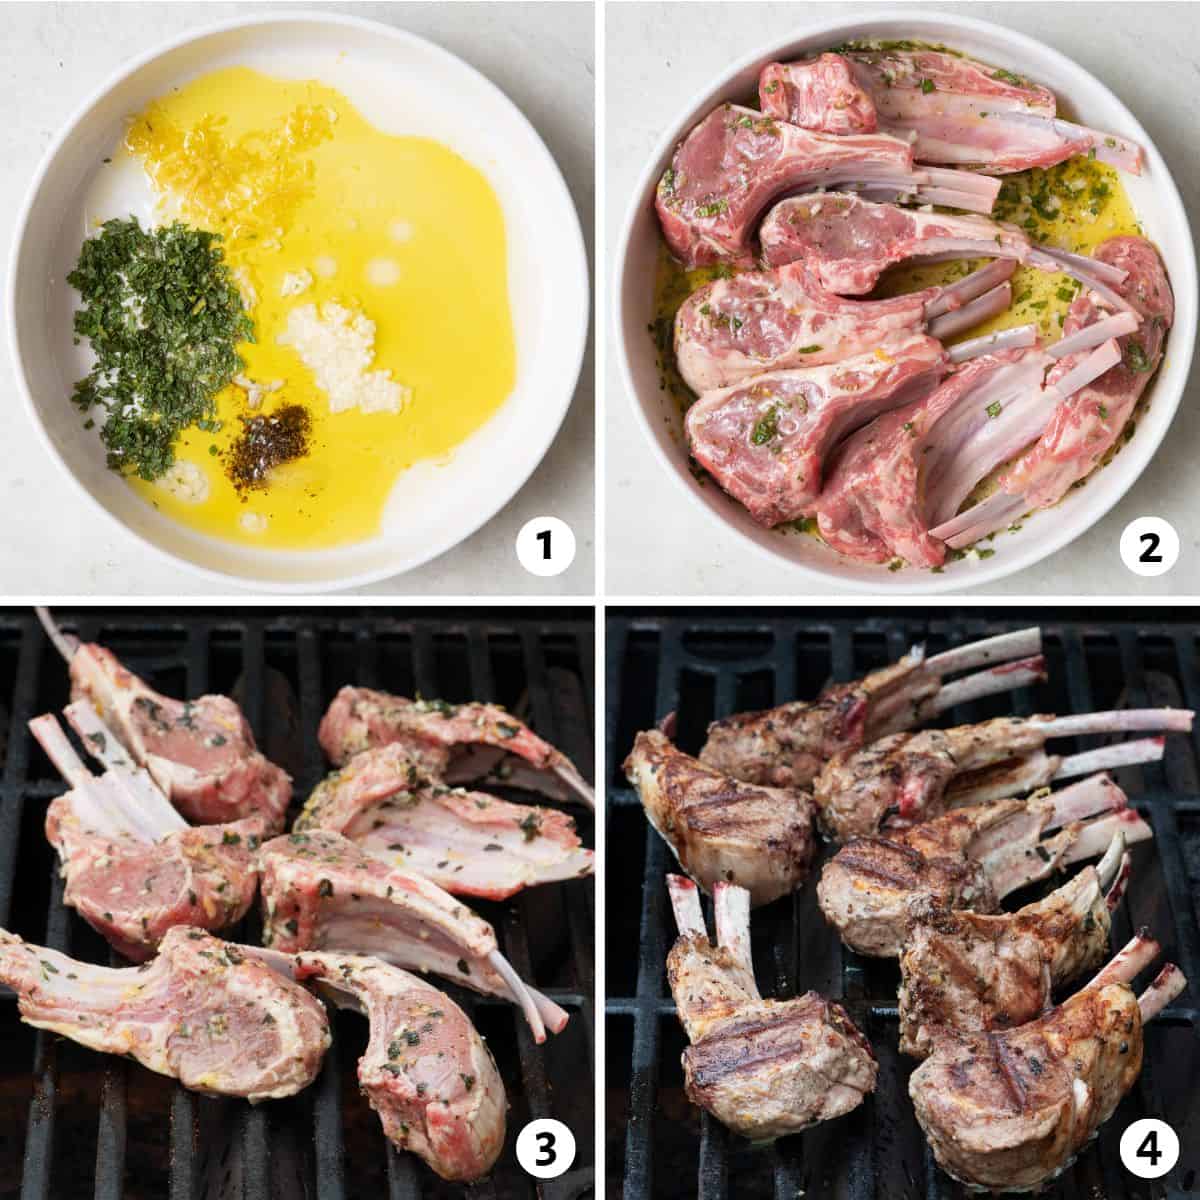 4 image collage making recipe: 1- oil and seasoning in a large shallow bowl, 2- lamb chops added and tossed in oil mixture, 3- chops on the grill, 4- after grilling to show grill marks and doneness.